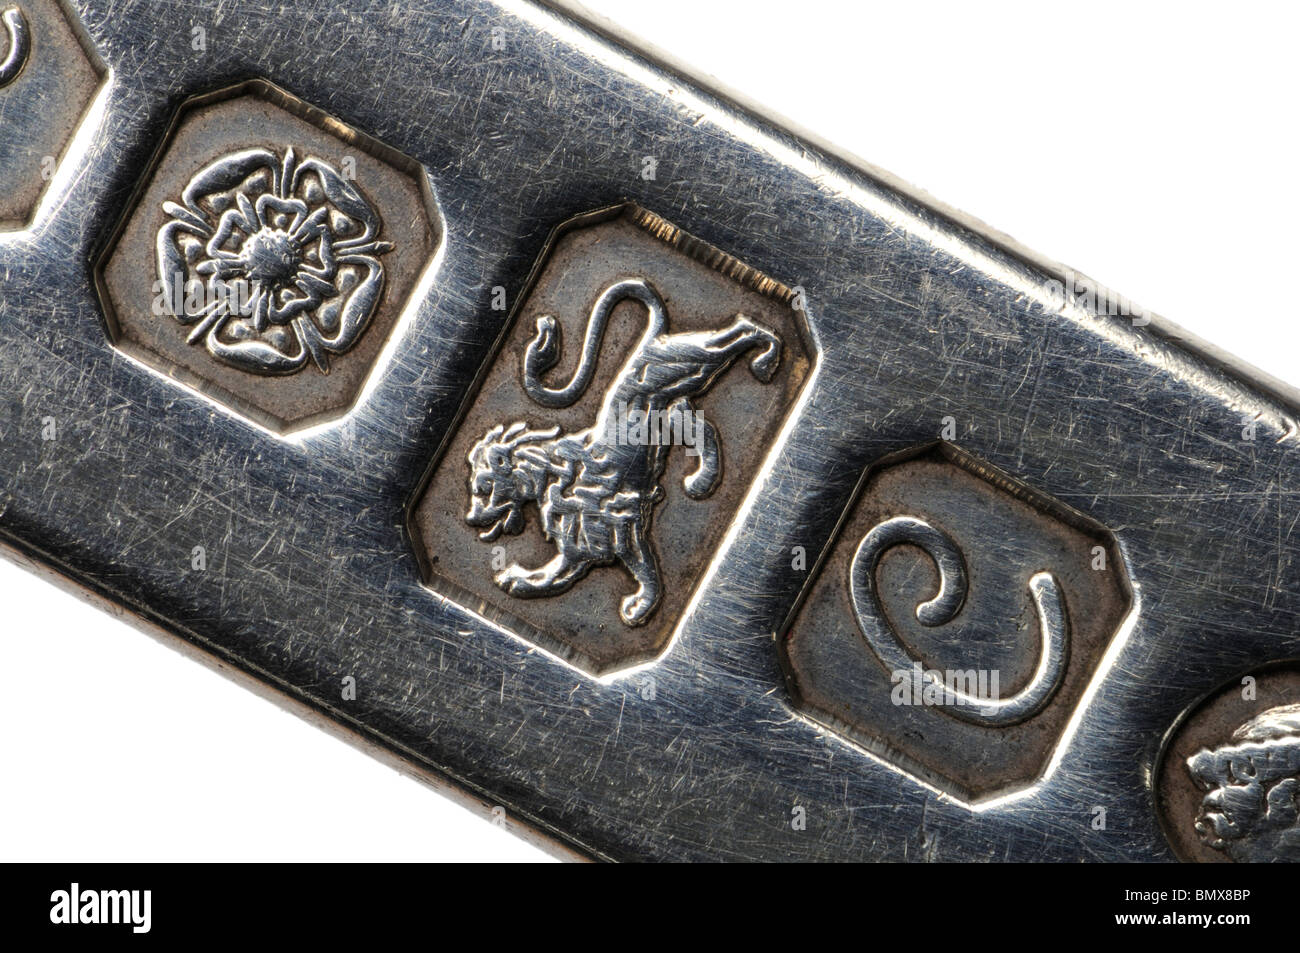 Pro Tips on How to Identify Hallmarks on Silver